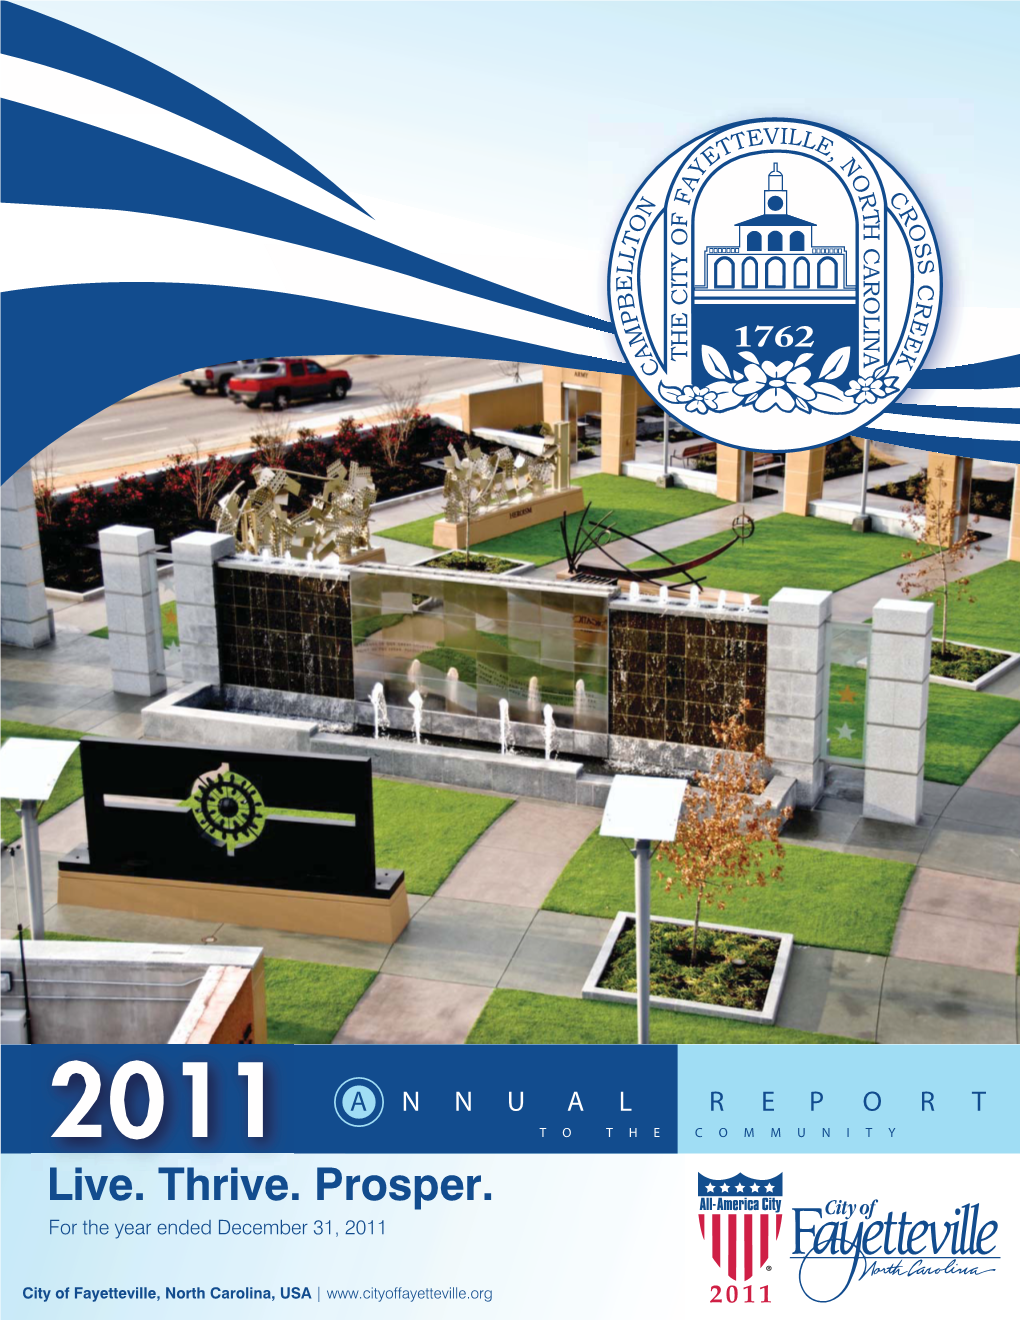 City of Fayetteville, North Carolina, USA | City of Fayetteville 2011 | Annual Report to the Community